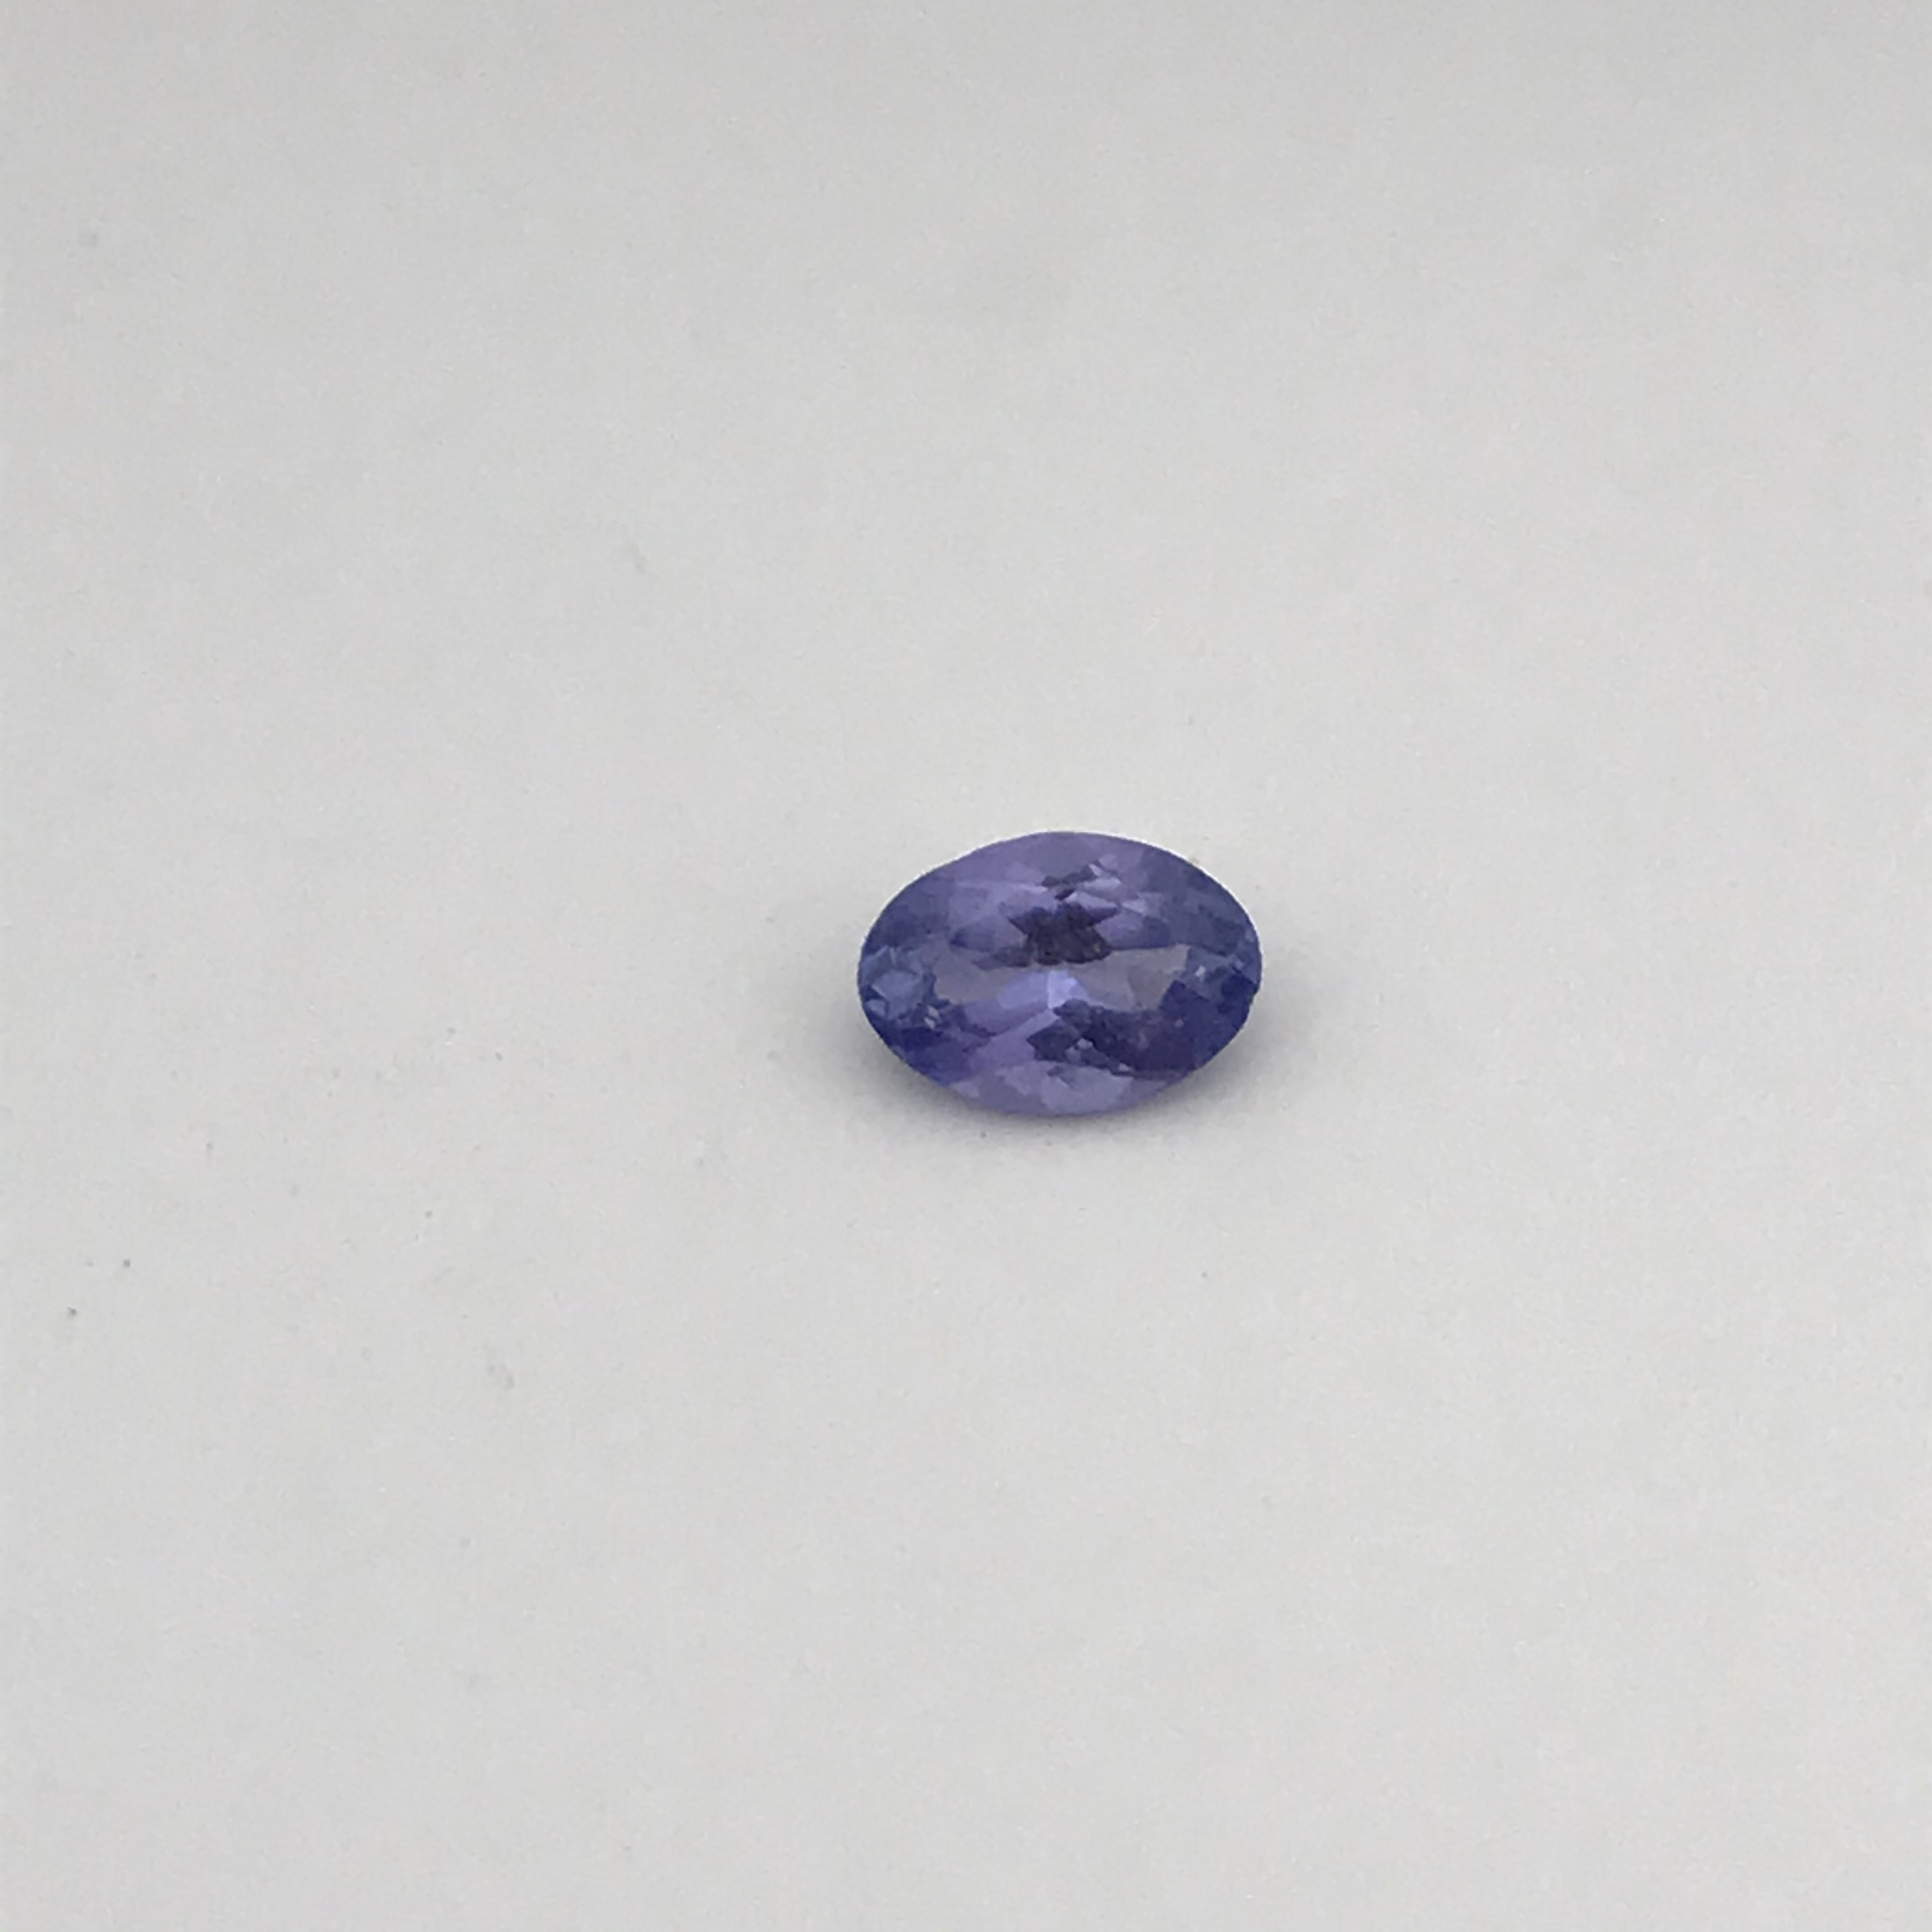 faceted loose gemstone for jewelry setting Violet Blue Tanzanite 0.54 carat 6.3 x 4.3 mm Oval Cut